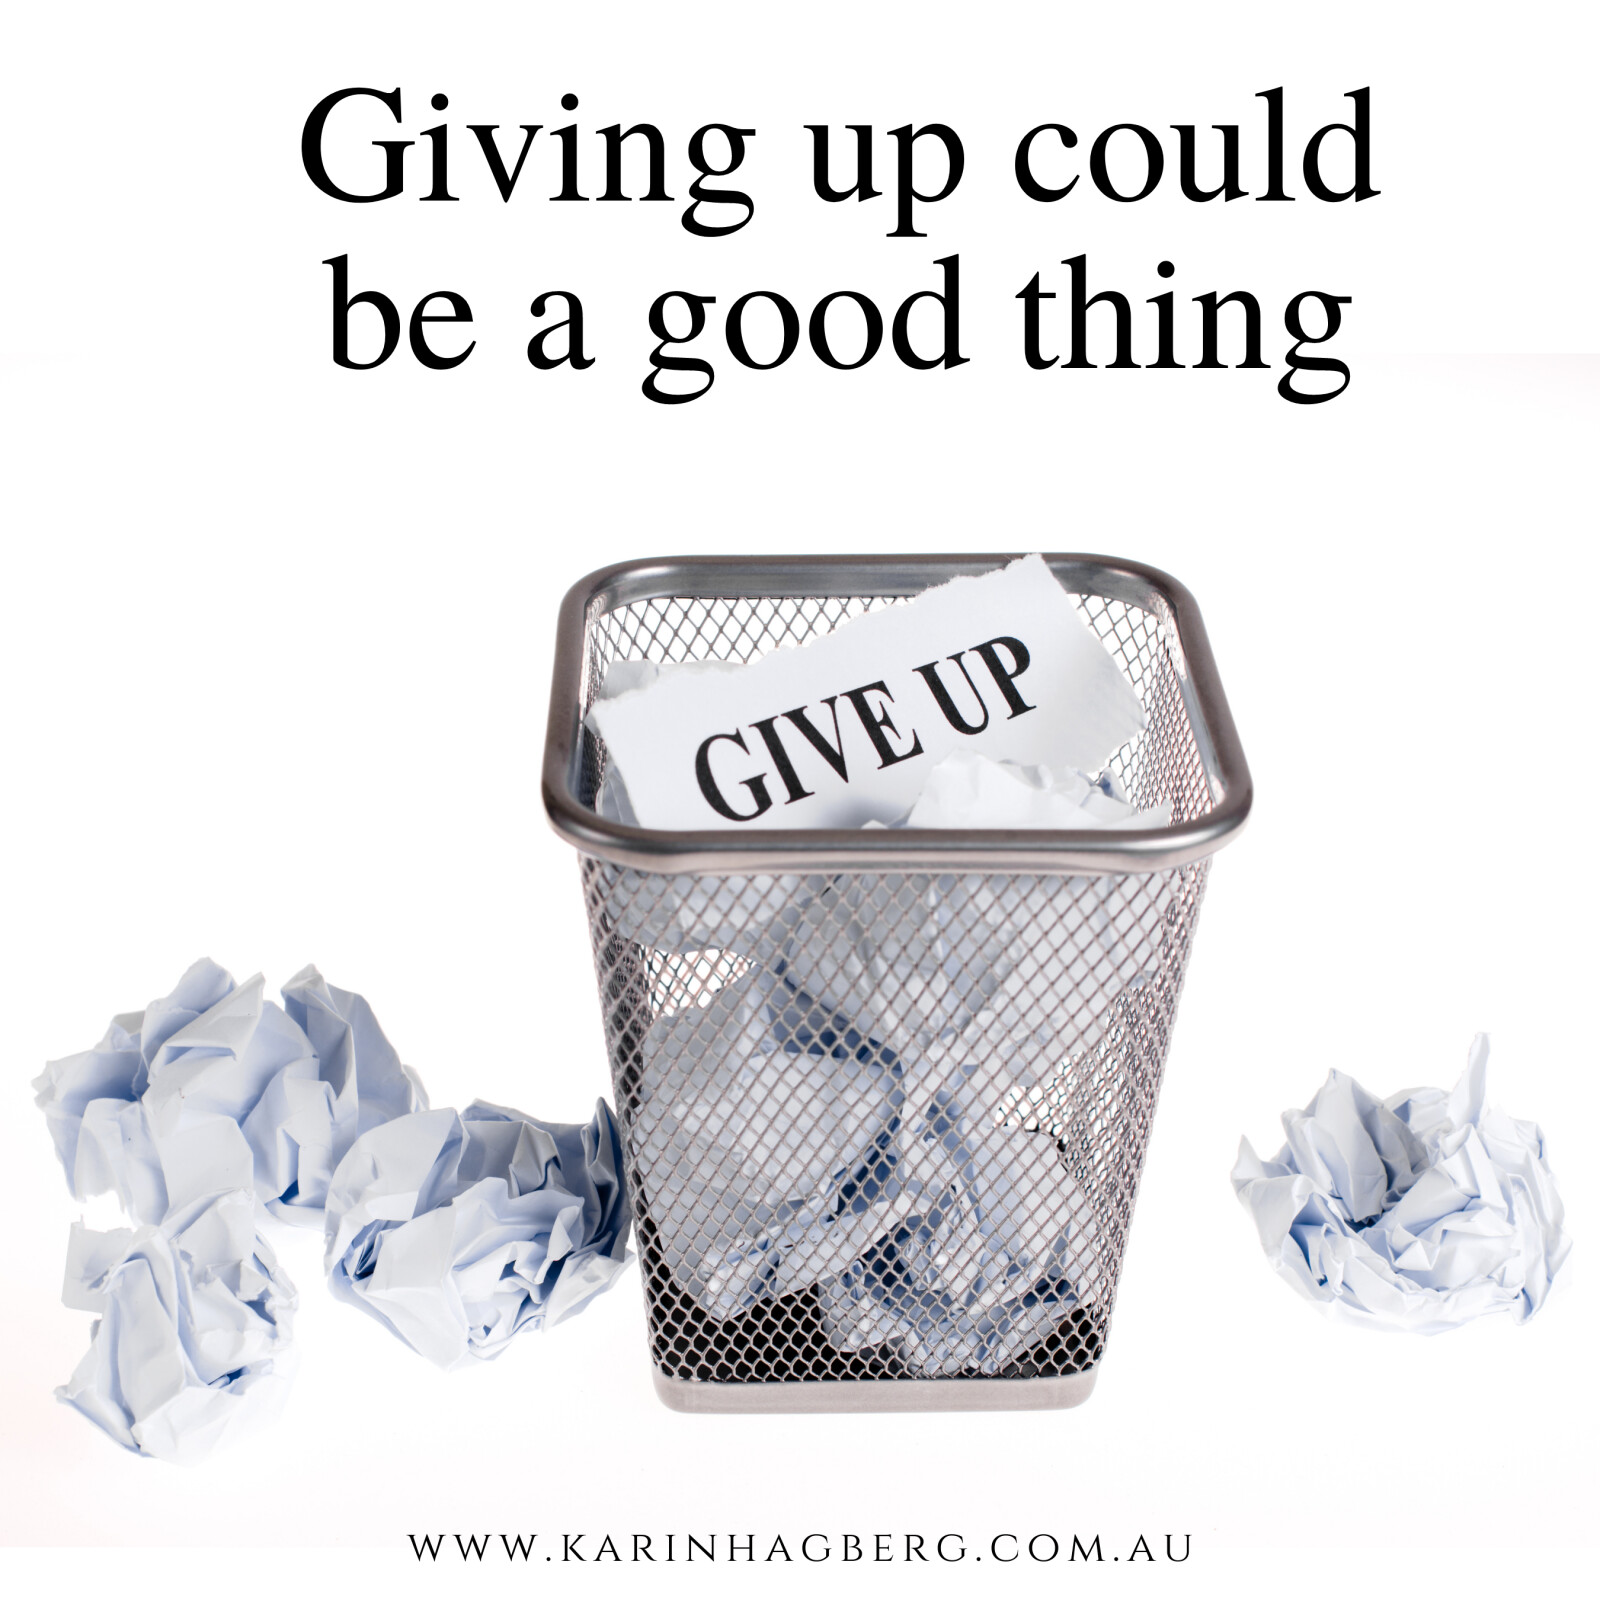 Giving up could be a good thing